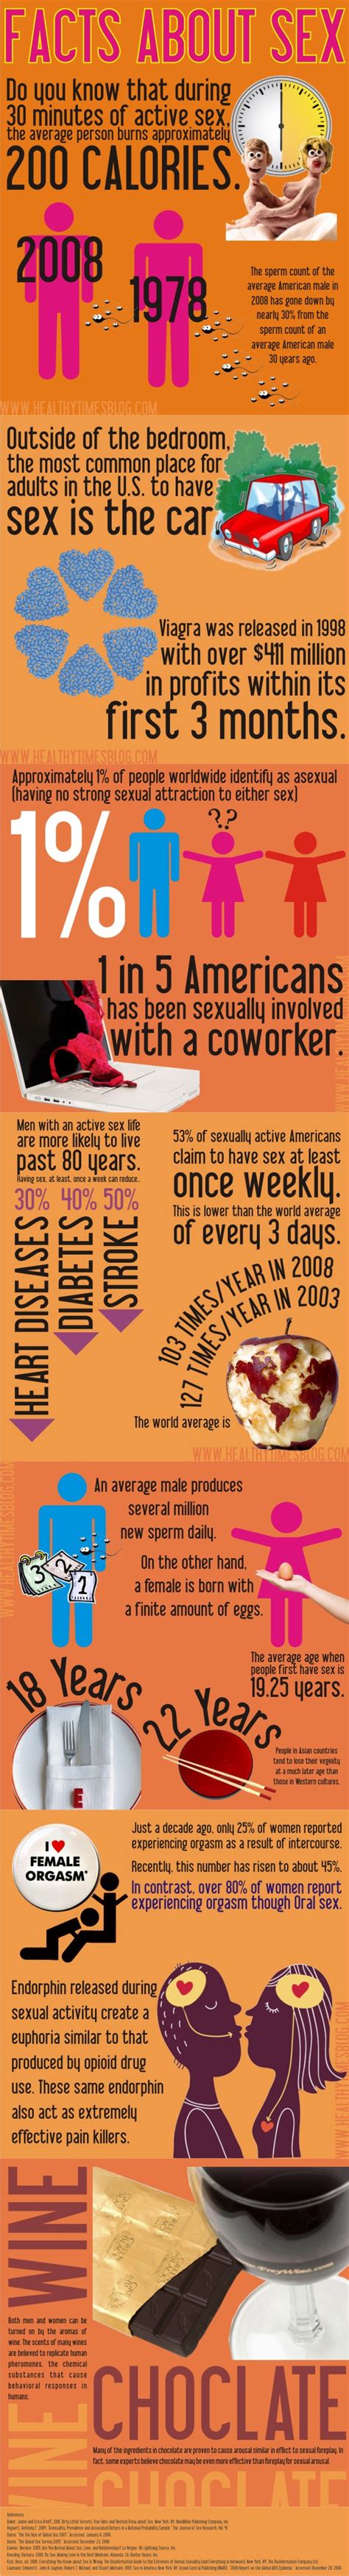 Facts About Sex [infographic] – Infographic List